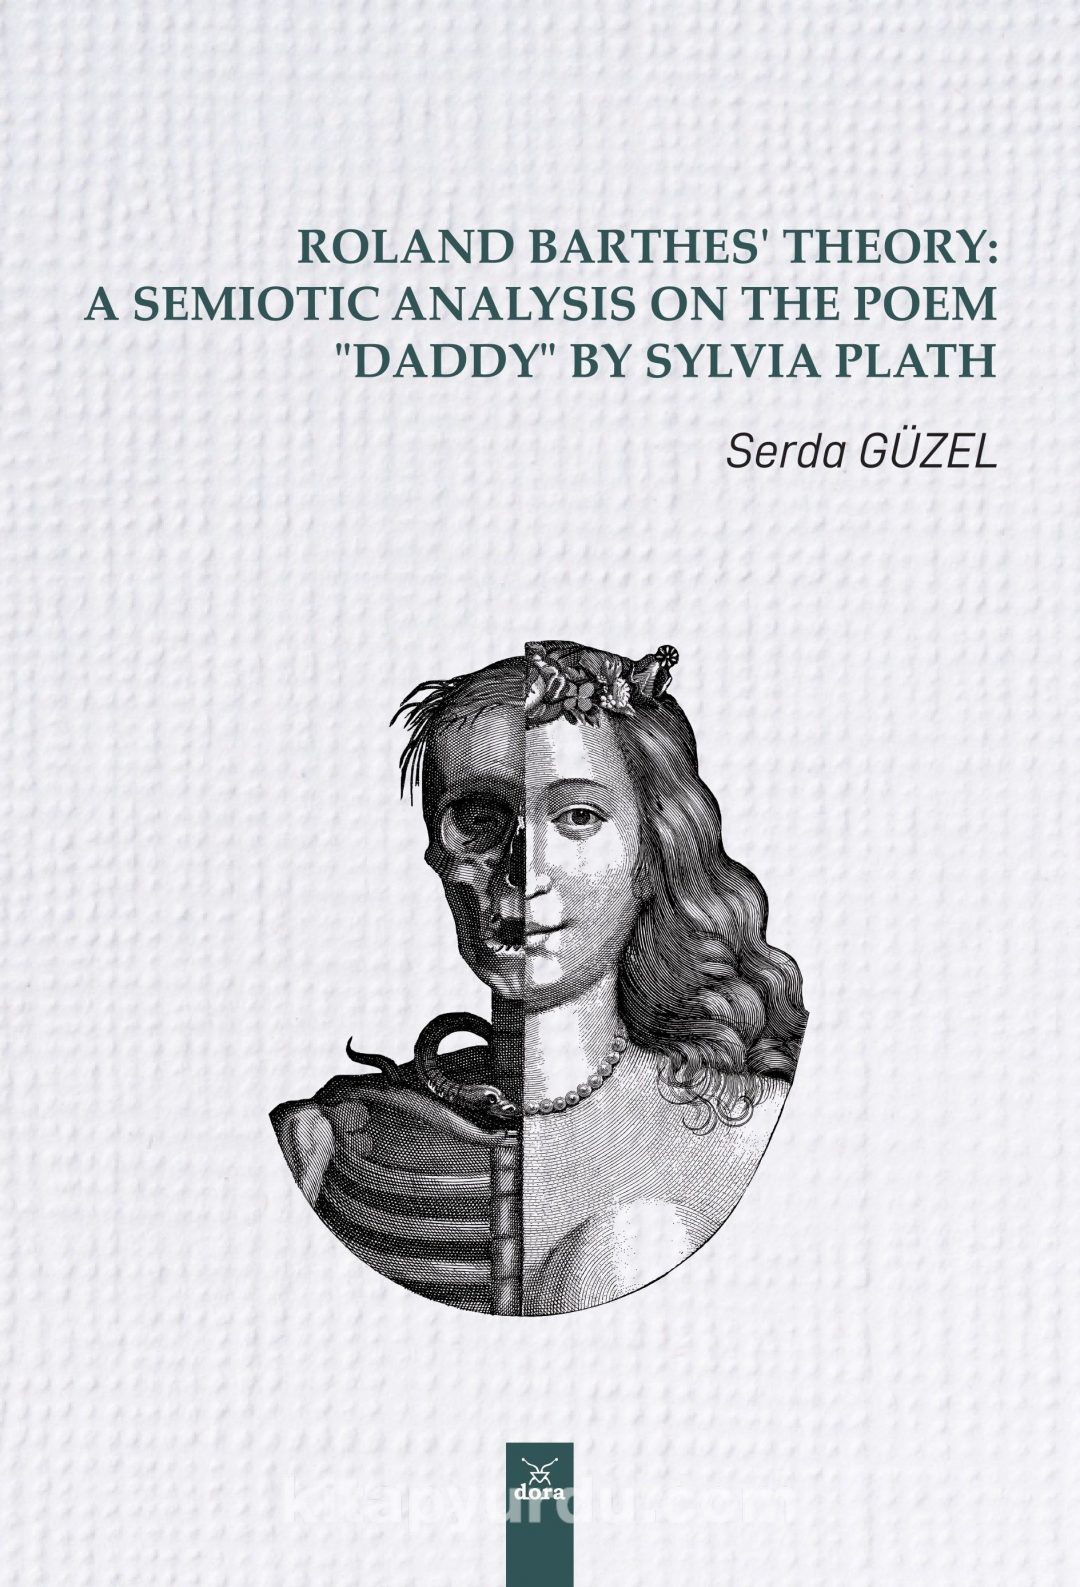 Roland Barthes’ Theory: A Semiotic Analysis on The Poem “Daddy” by Sylvia Plath